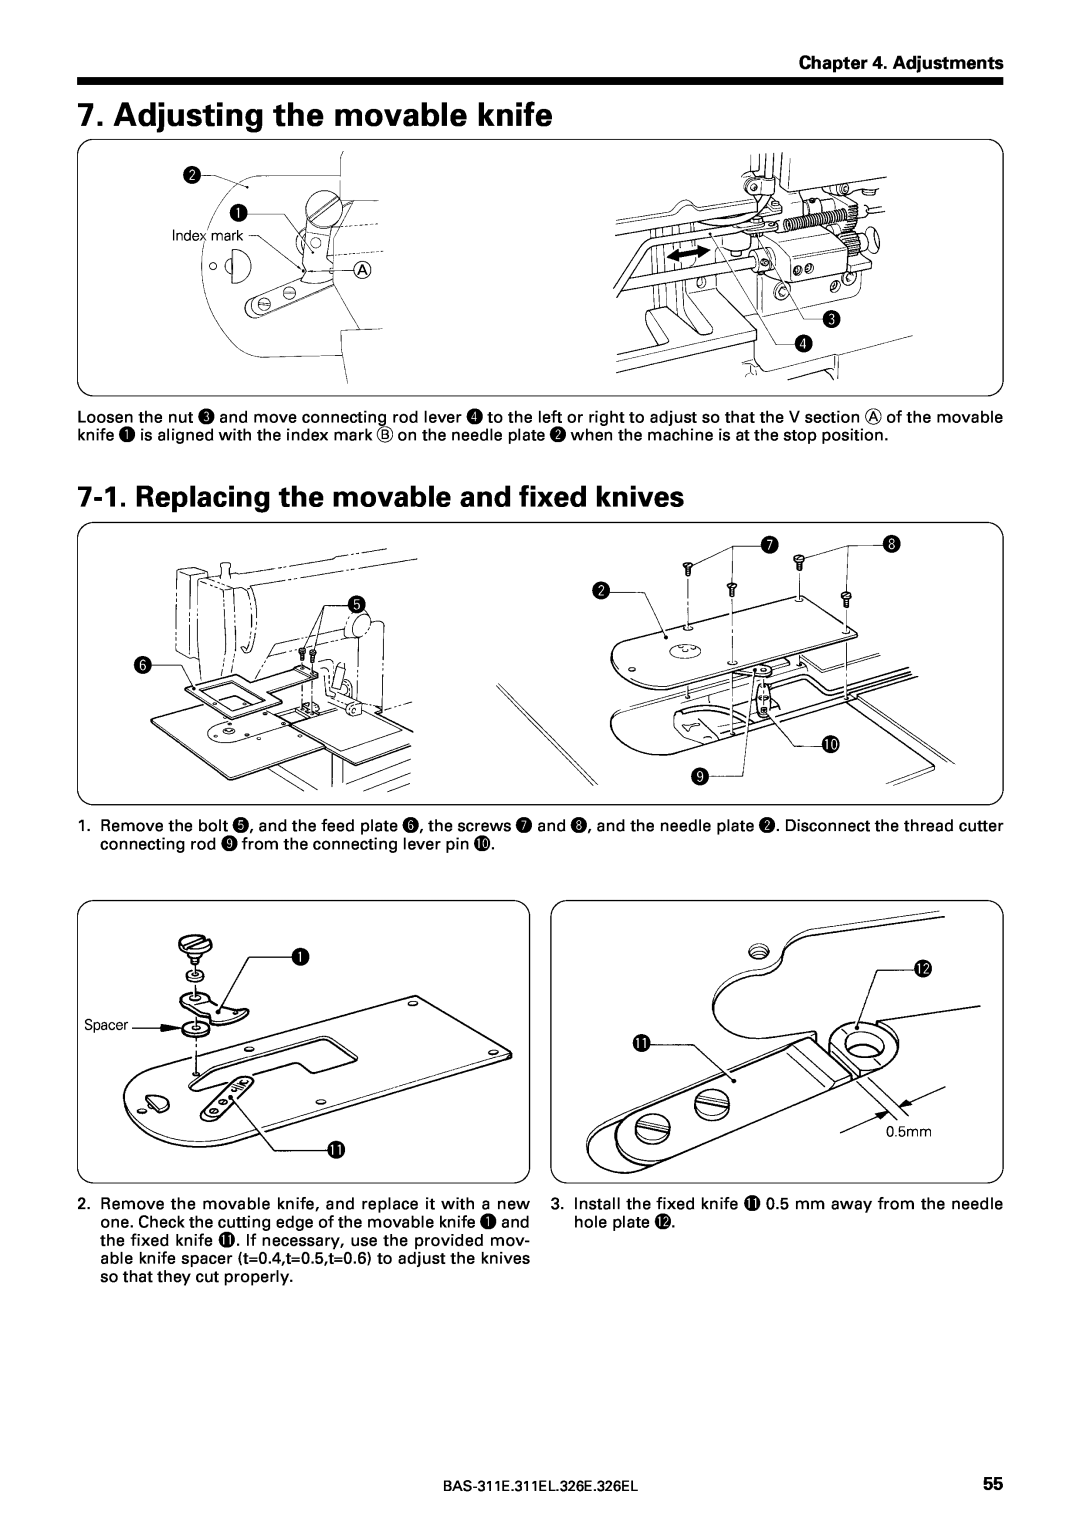 Brother BAS-311E service manual Adjusting the movable knife, Replacing the movable and fixed knives, Adjustments 